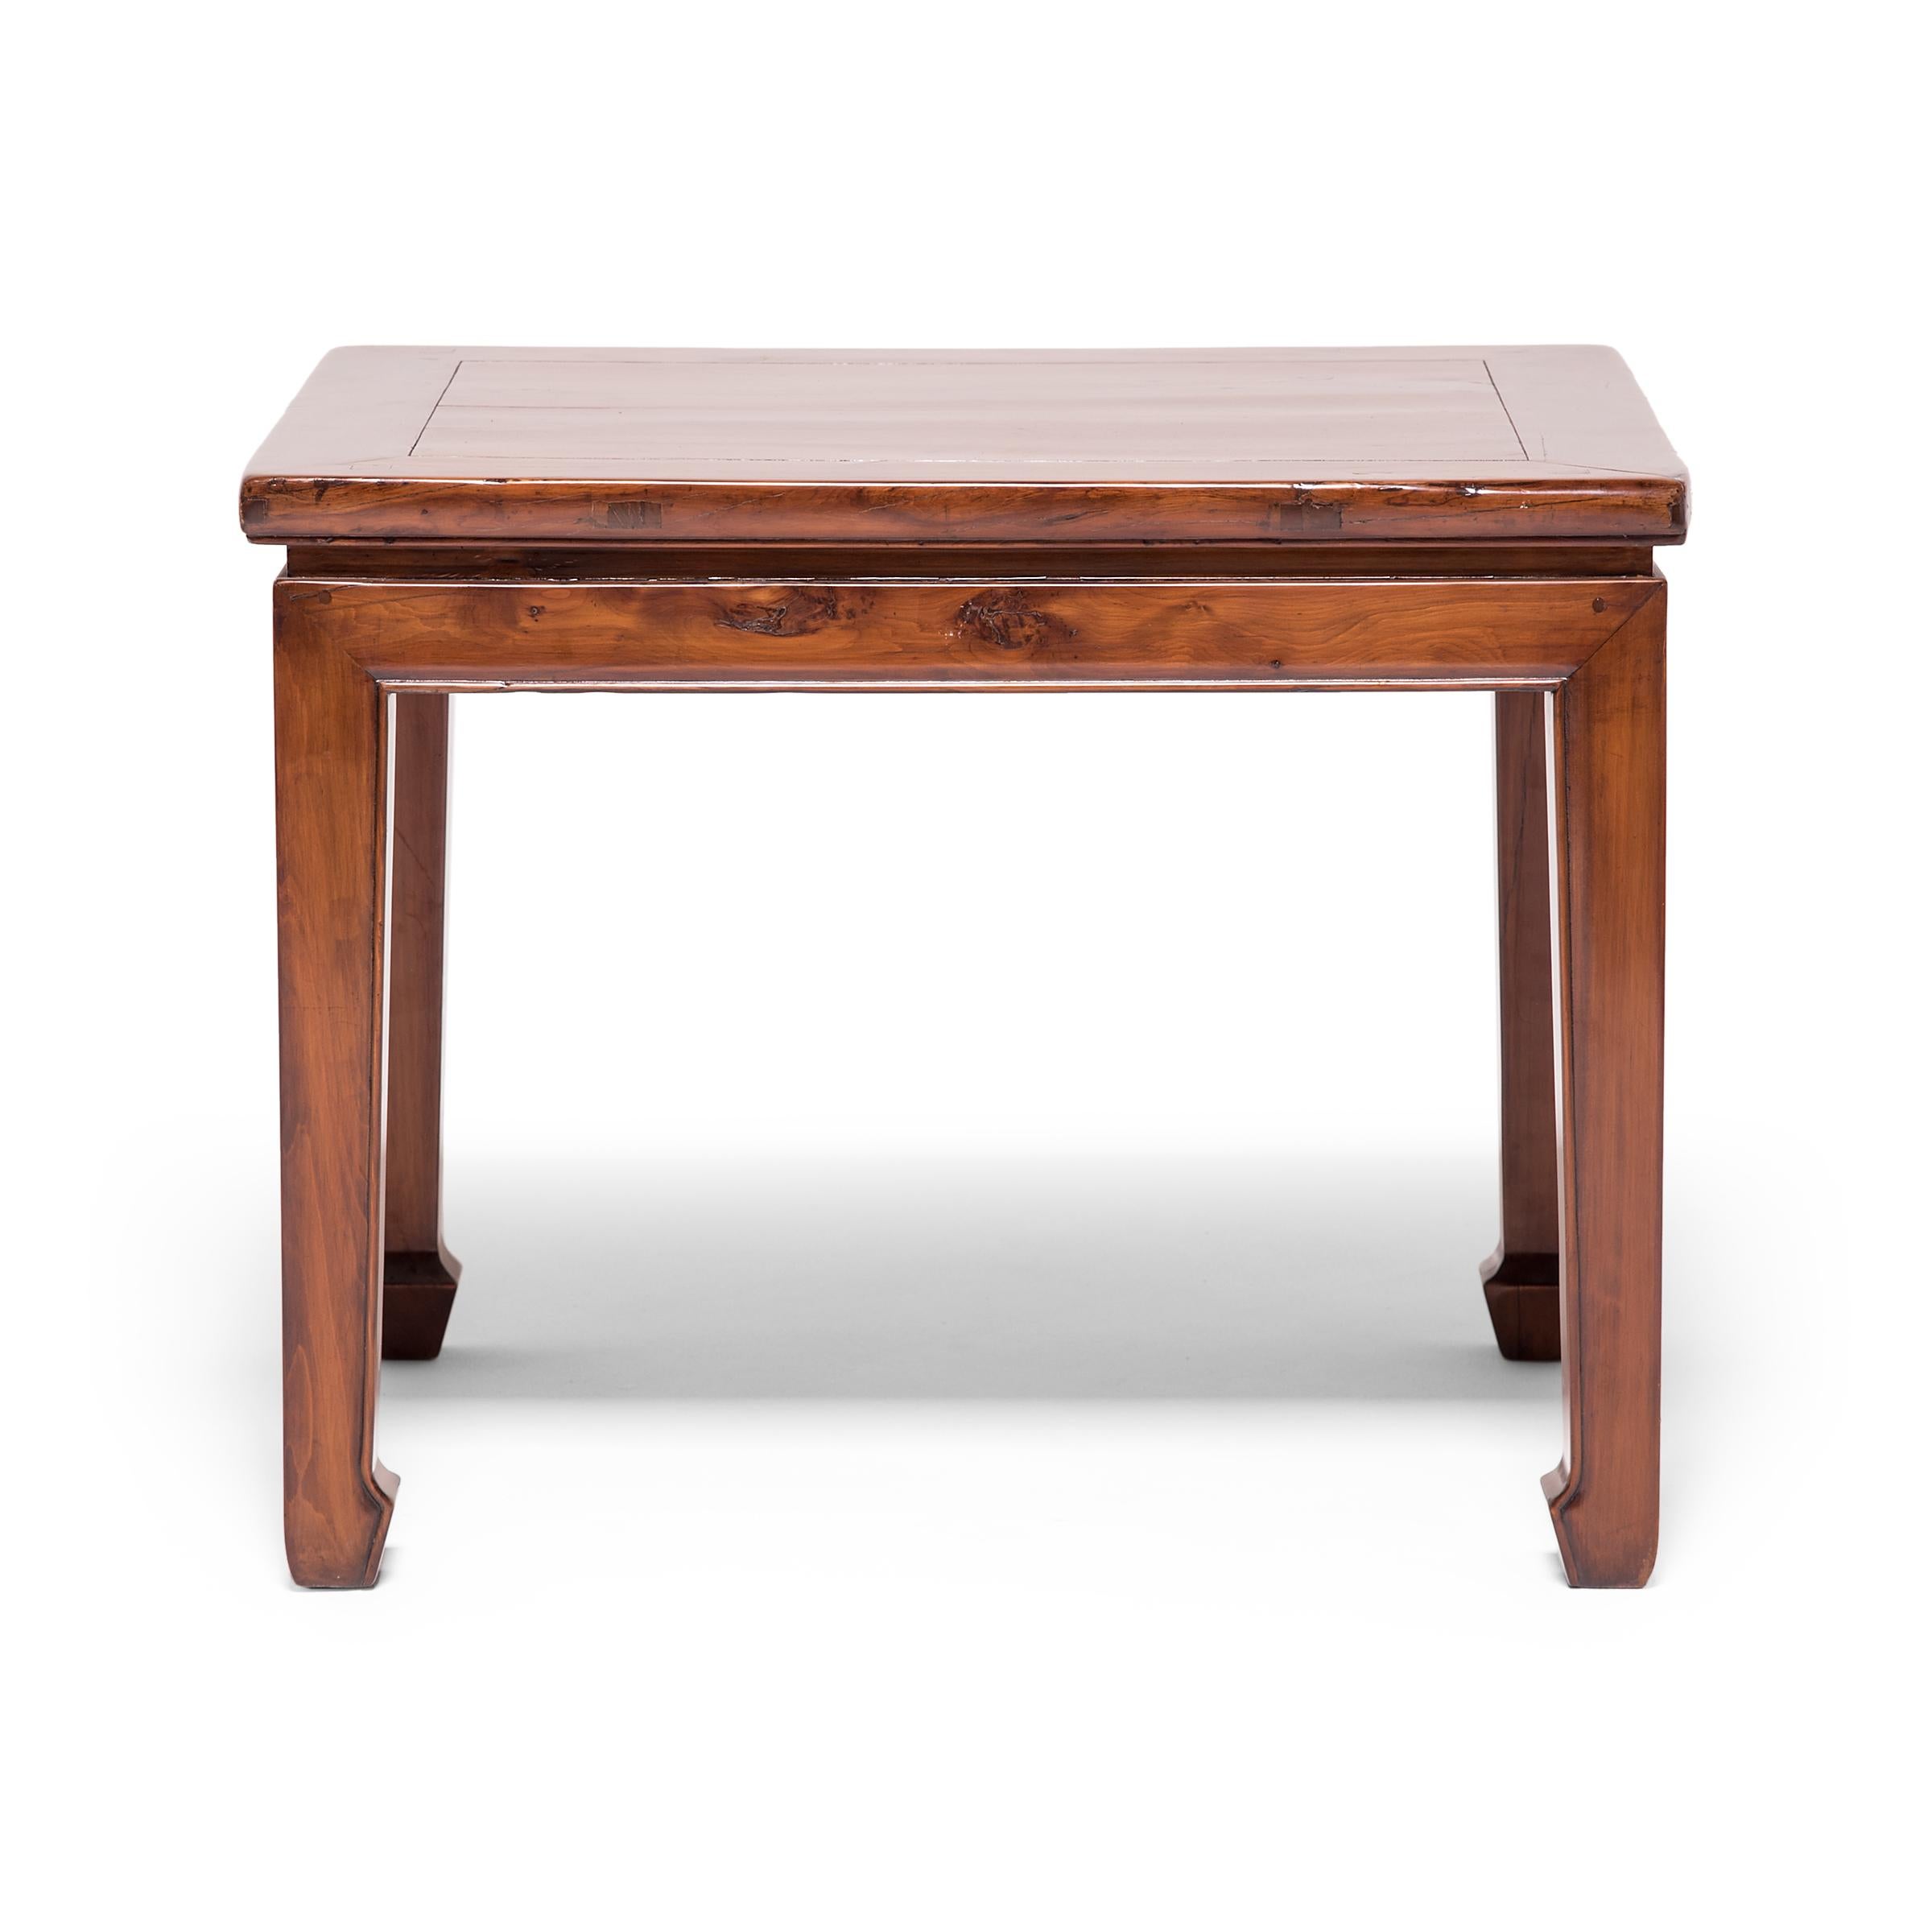 Qing Chinese Kang Table, c. 1850 For Sale